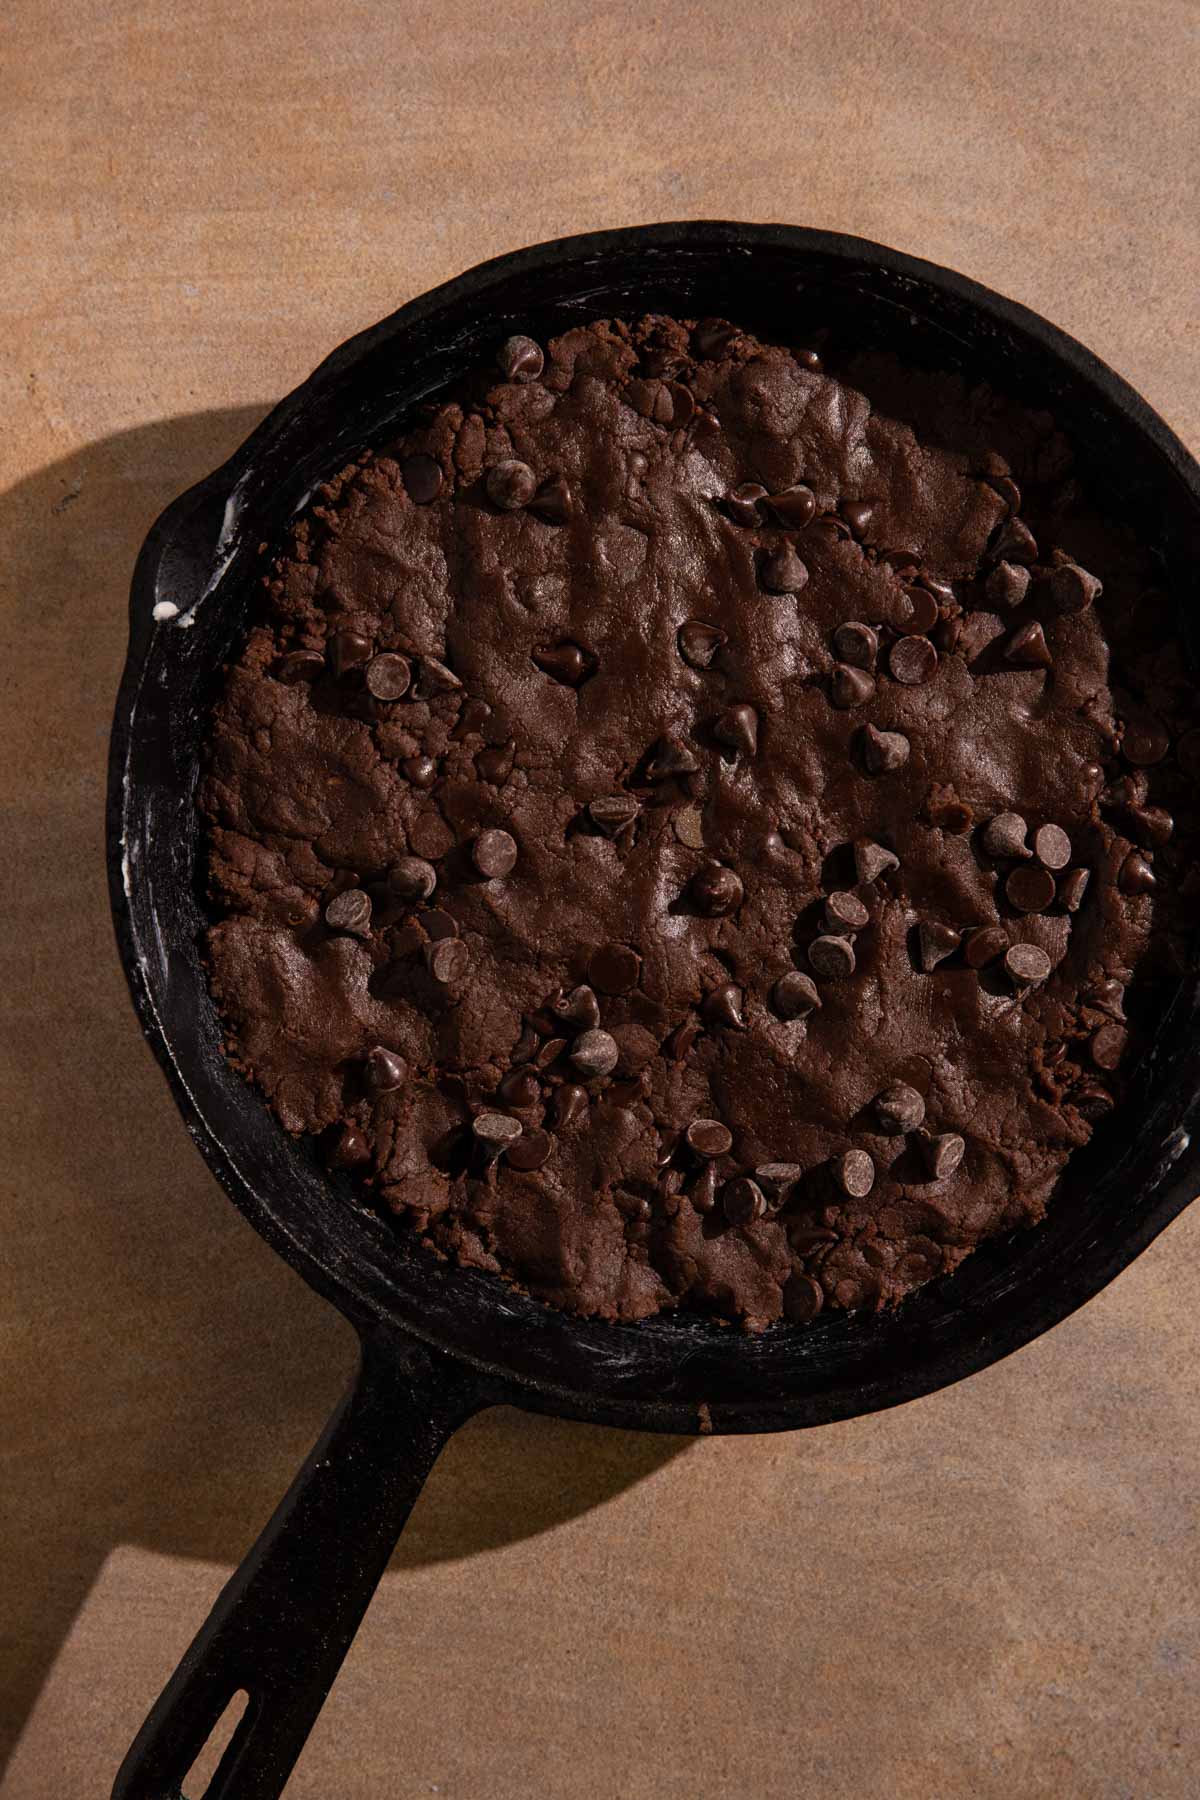 Double chocolate skillet cookie dough before baking